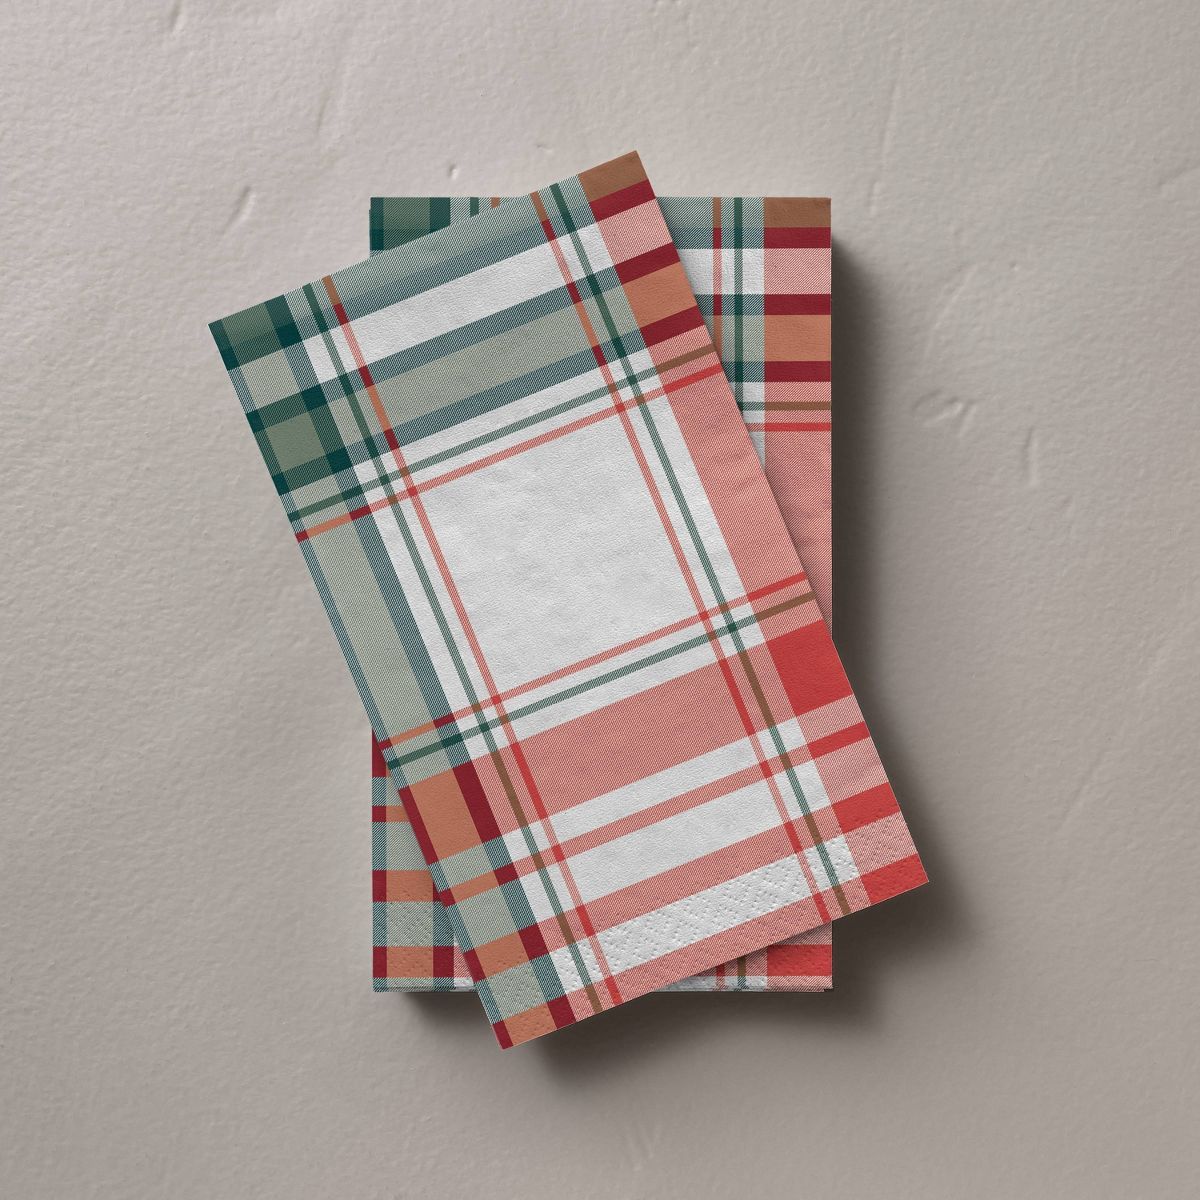 14ct Festive Plaid Paper Christmas Hand Towels Red/Green/Cream - Hearth & Hand™ with Magnolia | Target